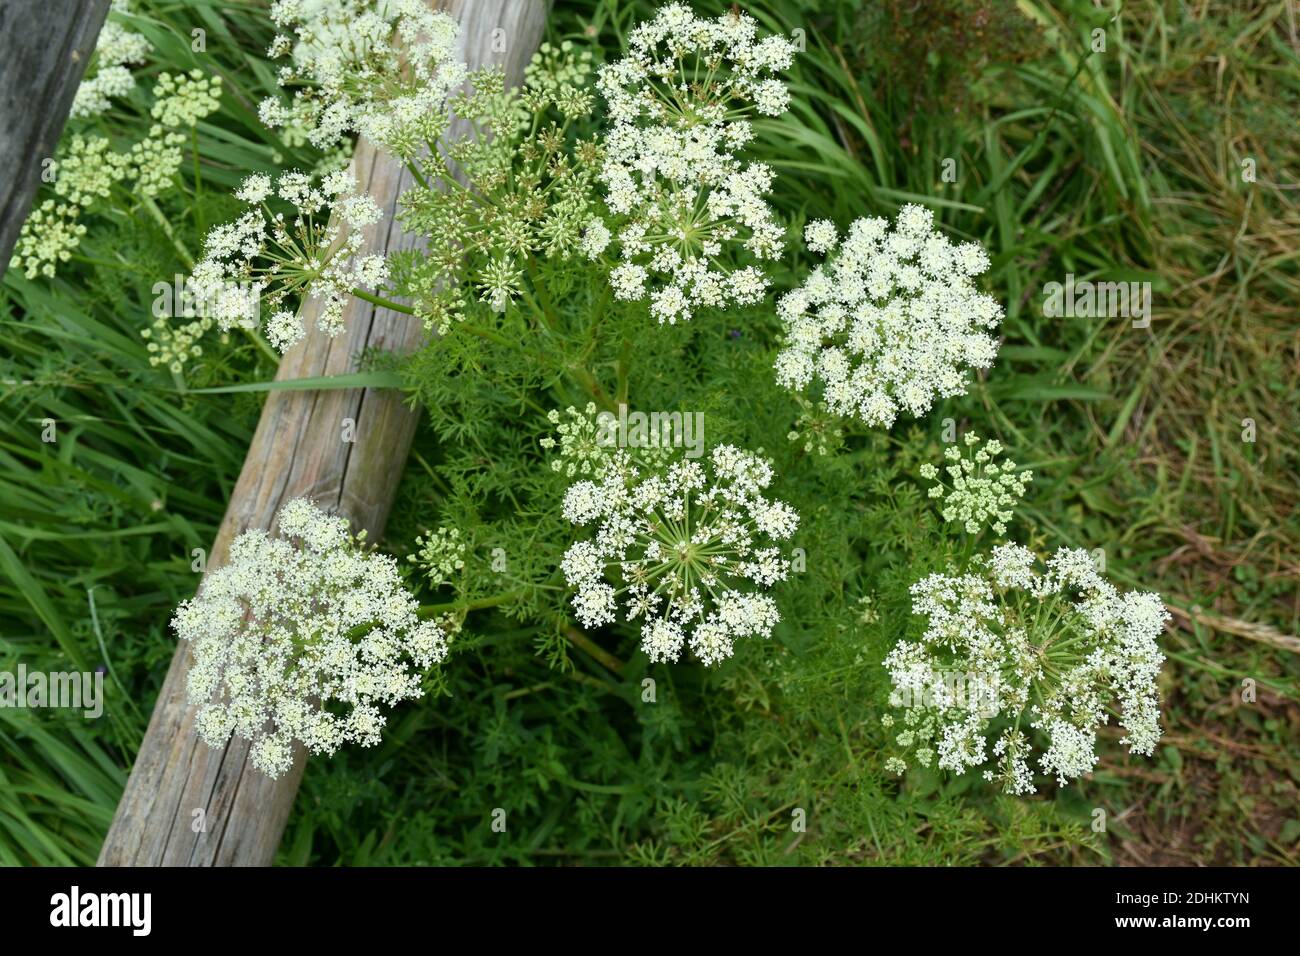 Caraway plant (Carum carvi) in full bloom on mountain trail. Stock Photo